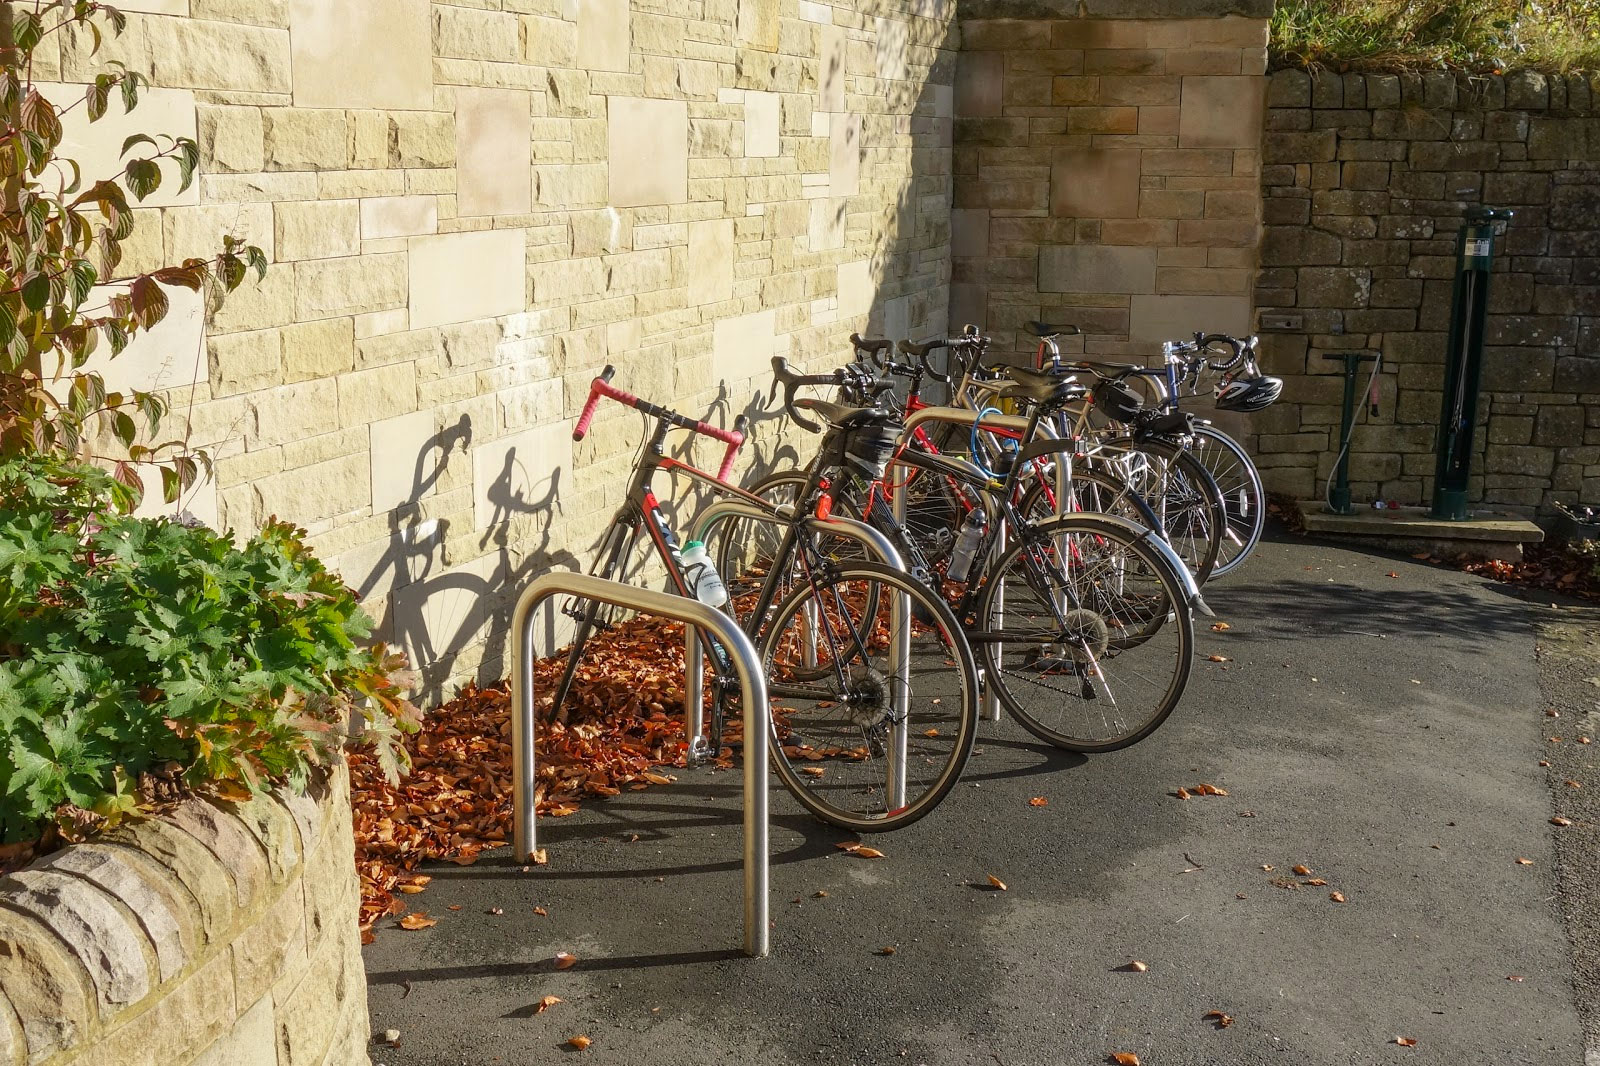 The Anglers Rest in Bamford wins best in class for its secure stands, pump and bike repair station.